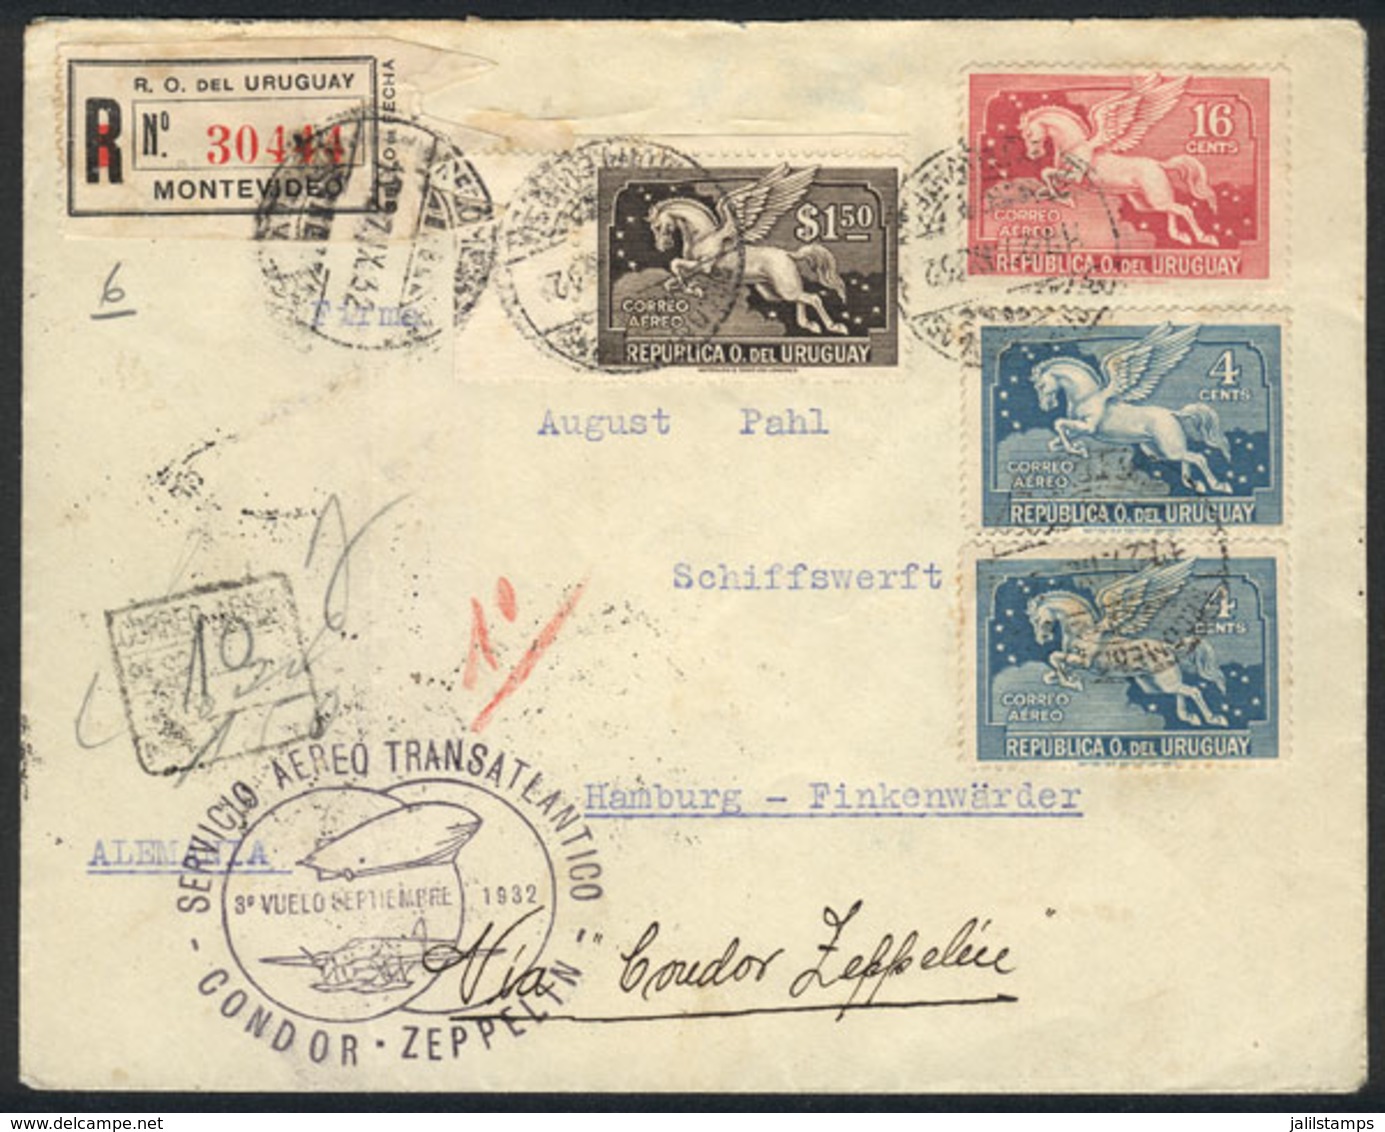 URUGUAY: Registered Cover Franked With $1.74, Sent From Montevideo To Germany On 27/SE/1932, With Special Handstamp Of Z - Uruguay